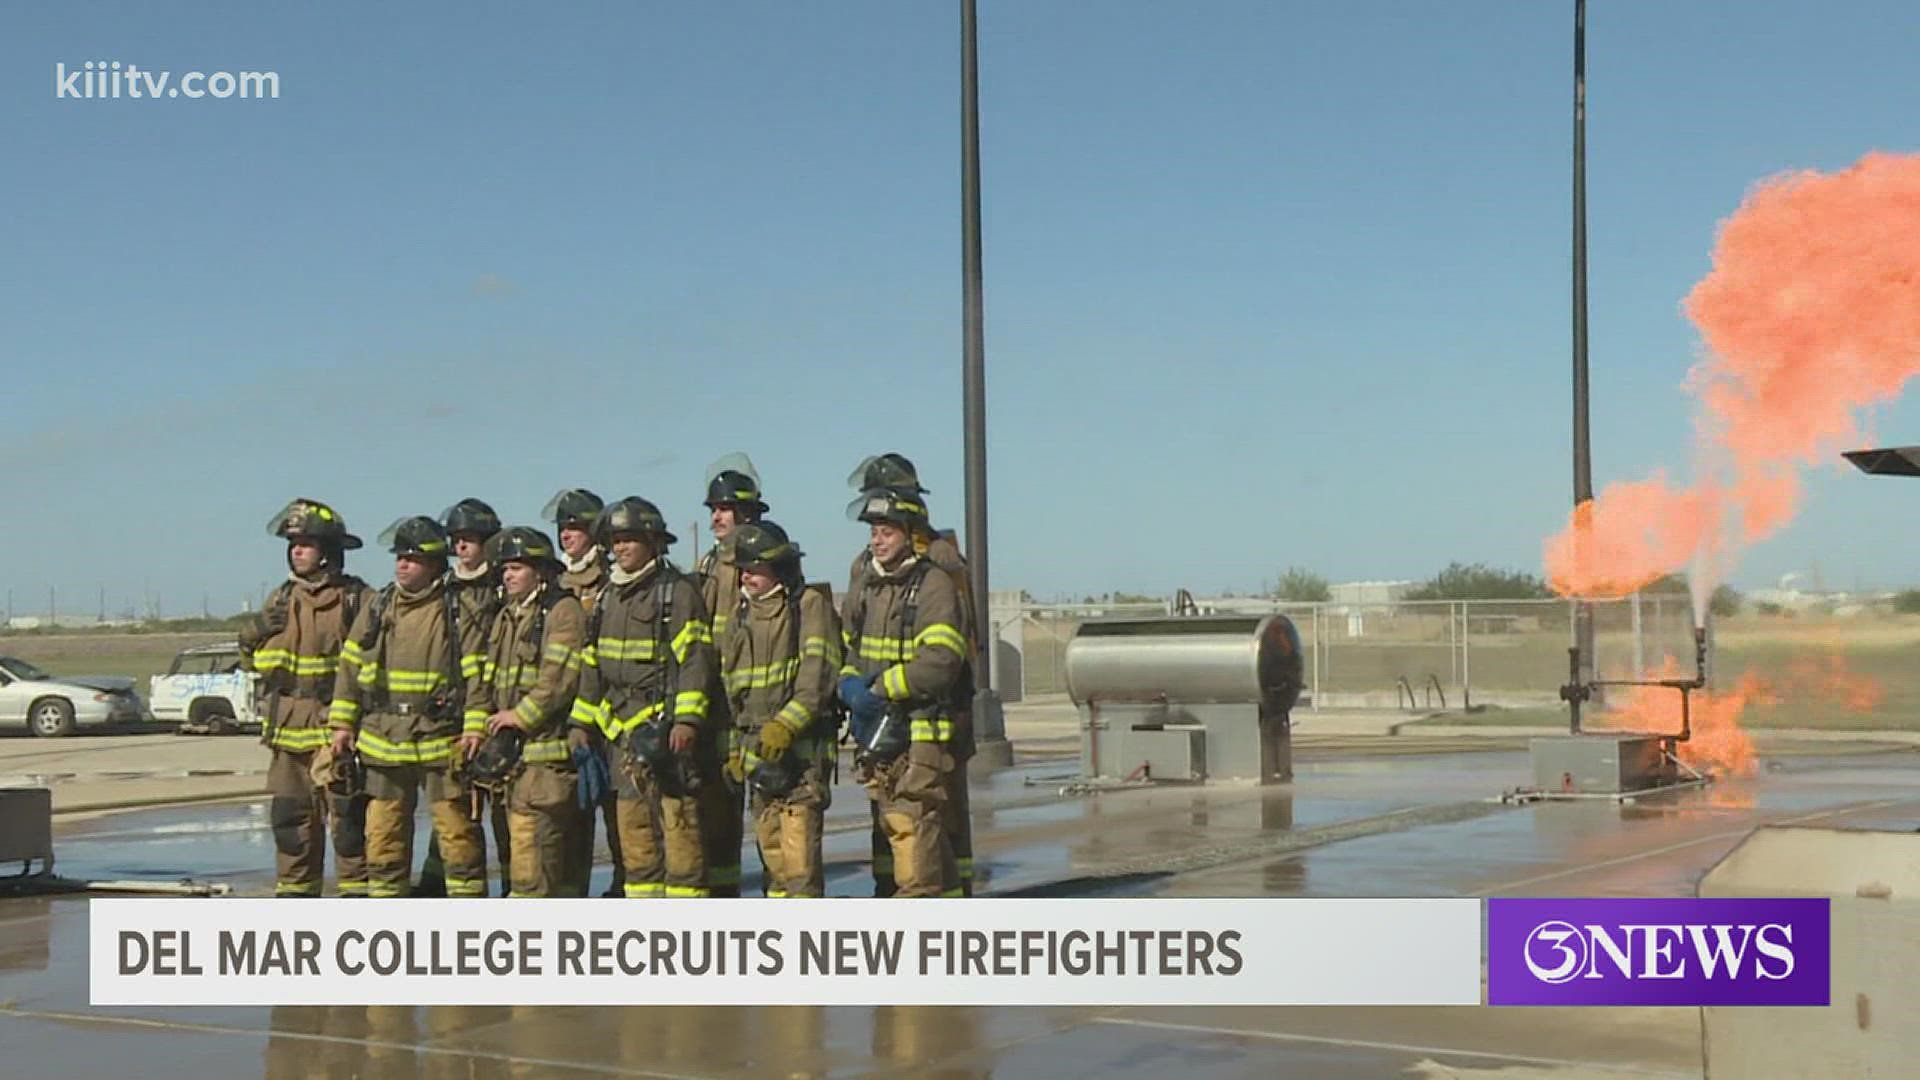 Cadets ranging in age from 18 to nearly 40 donned full firefighting gear as they took their final steps toward finishing their training.